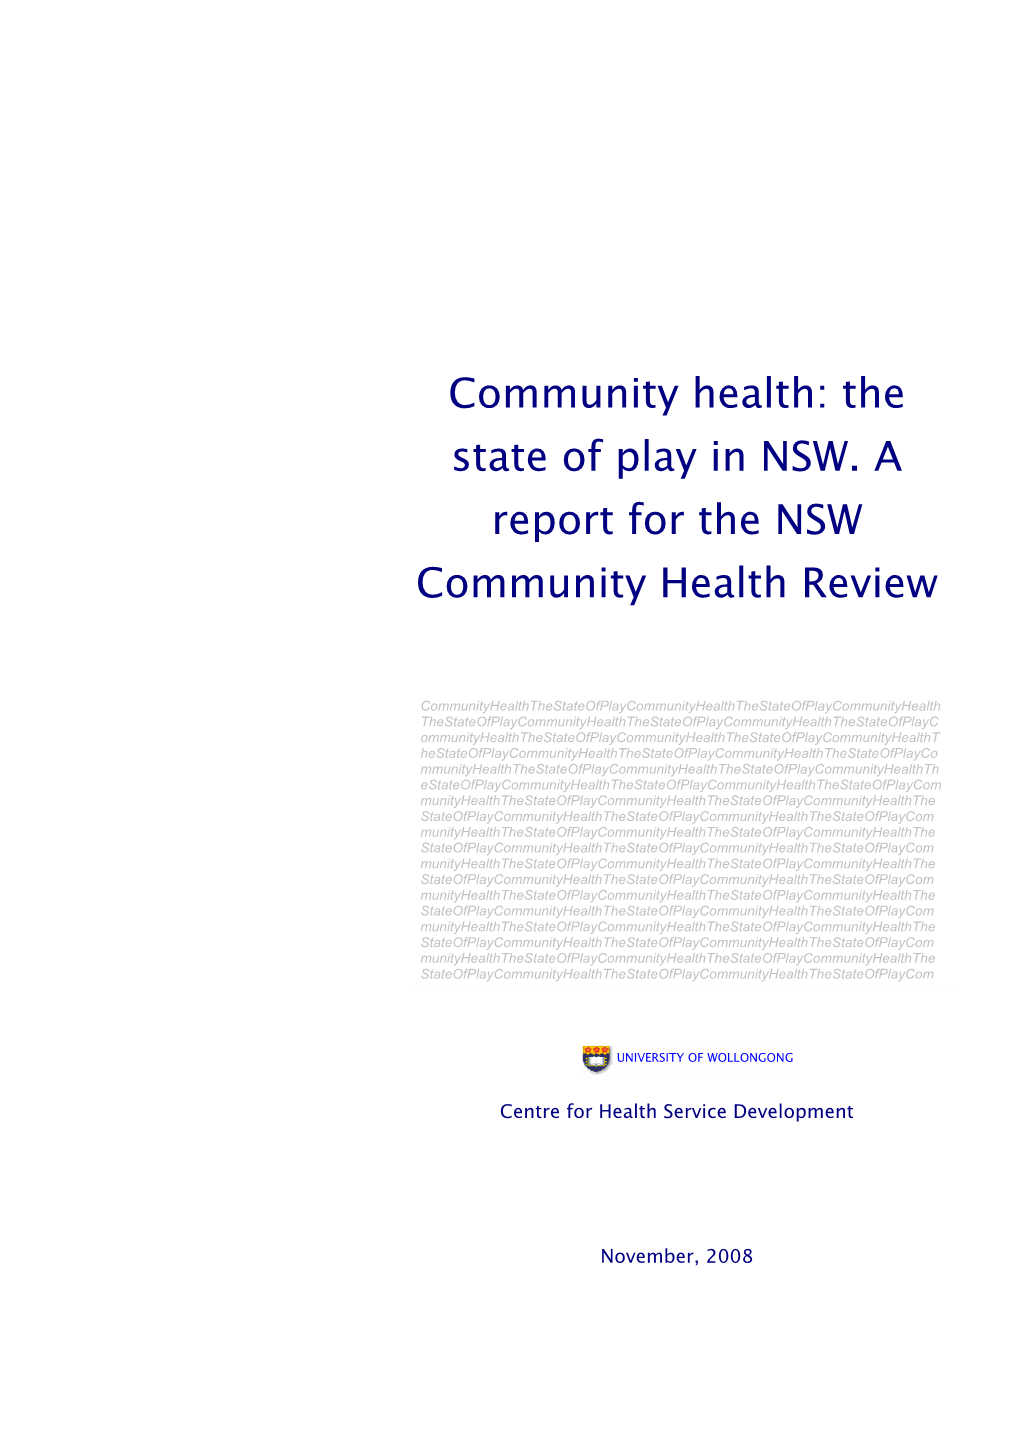 Community Health: the State of Play in NSW